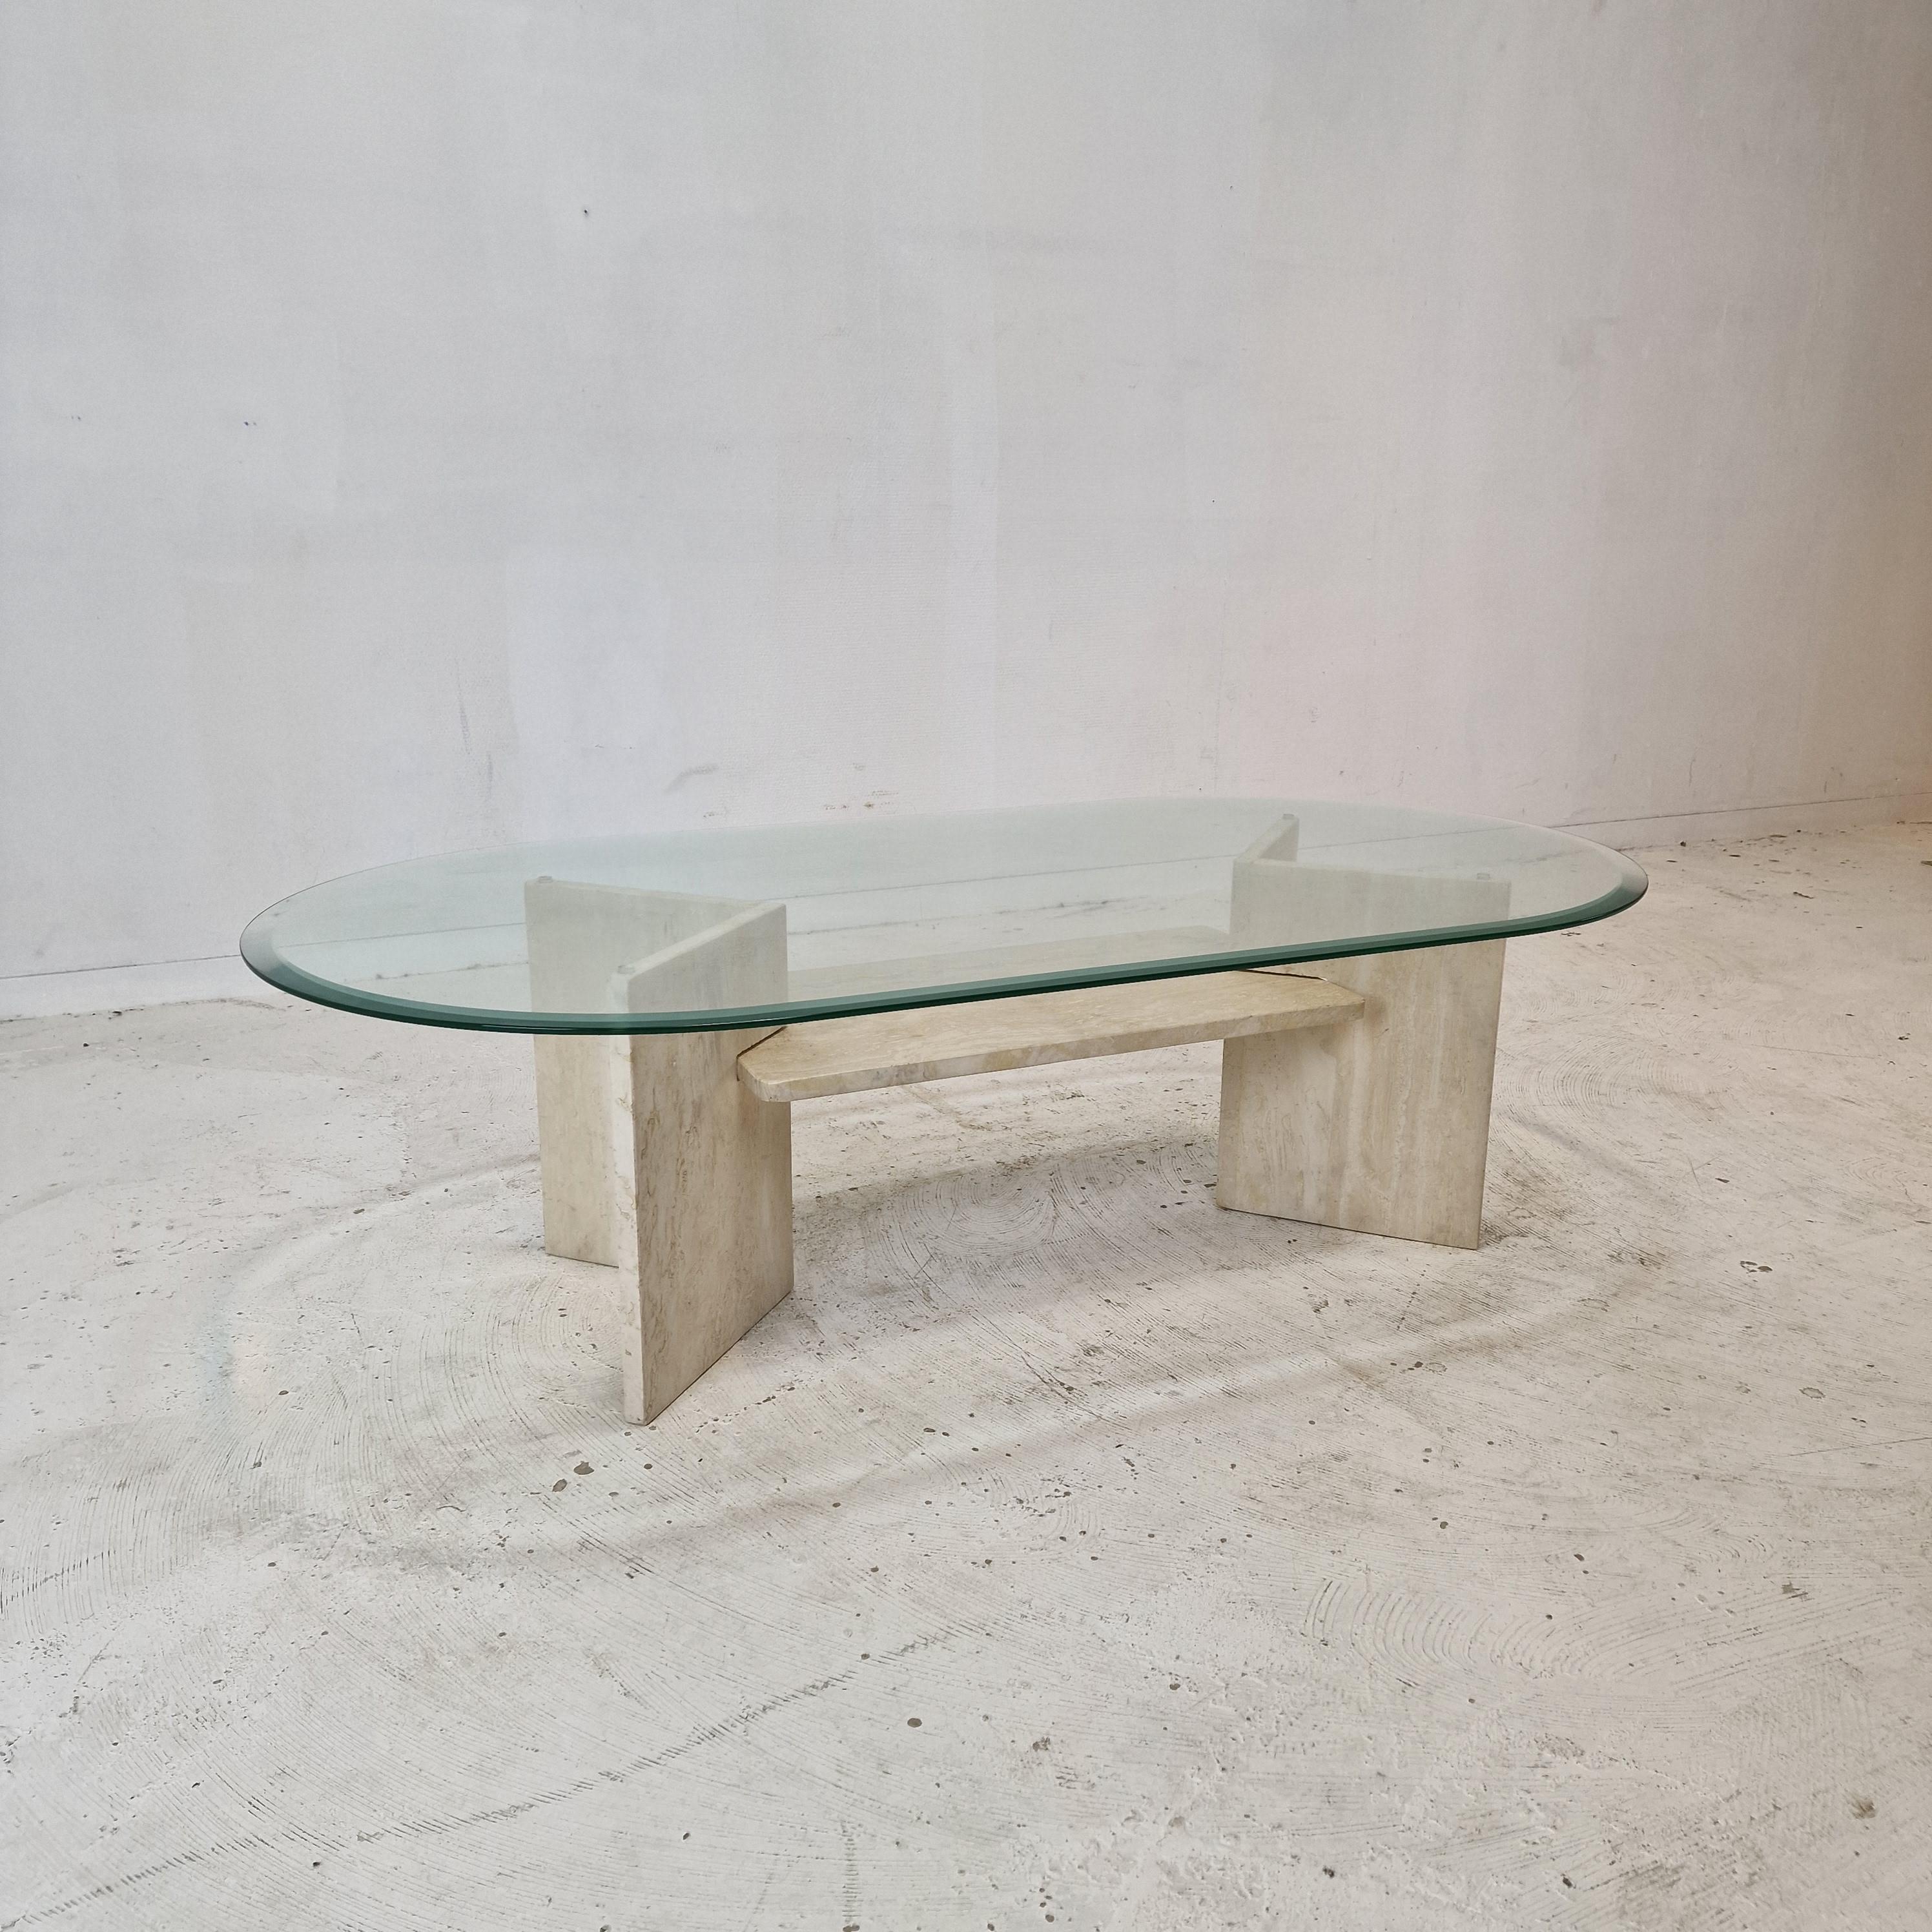 Hand-Crafted Italian Coffee Table in Travertine and Facet Cut Glass, 1980s For Sale